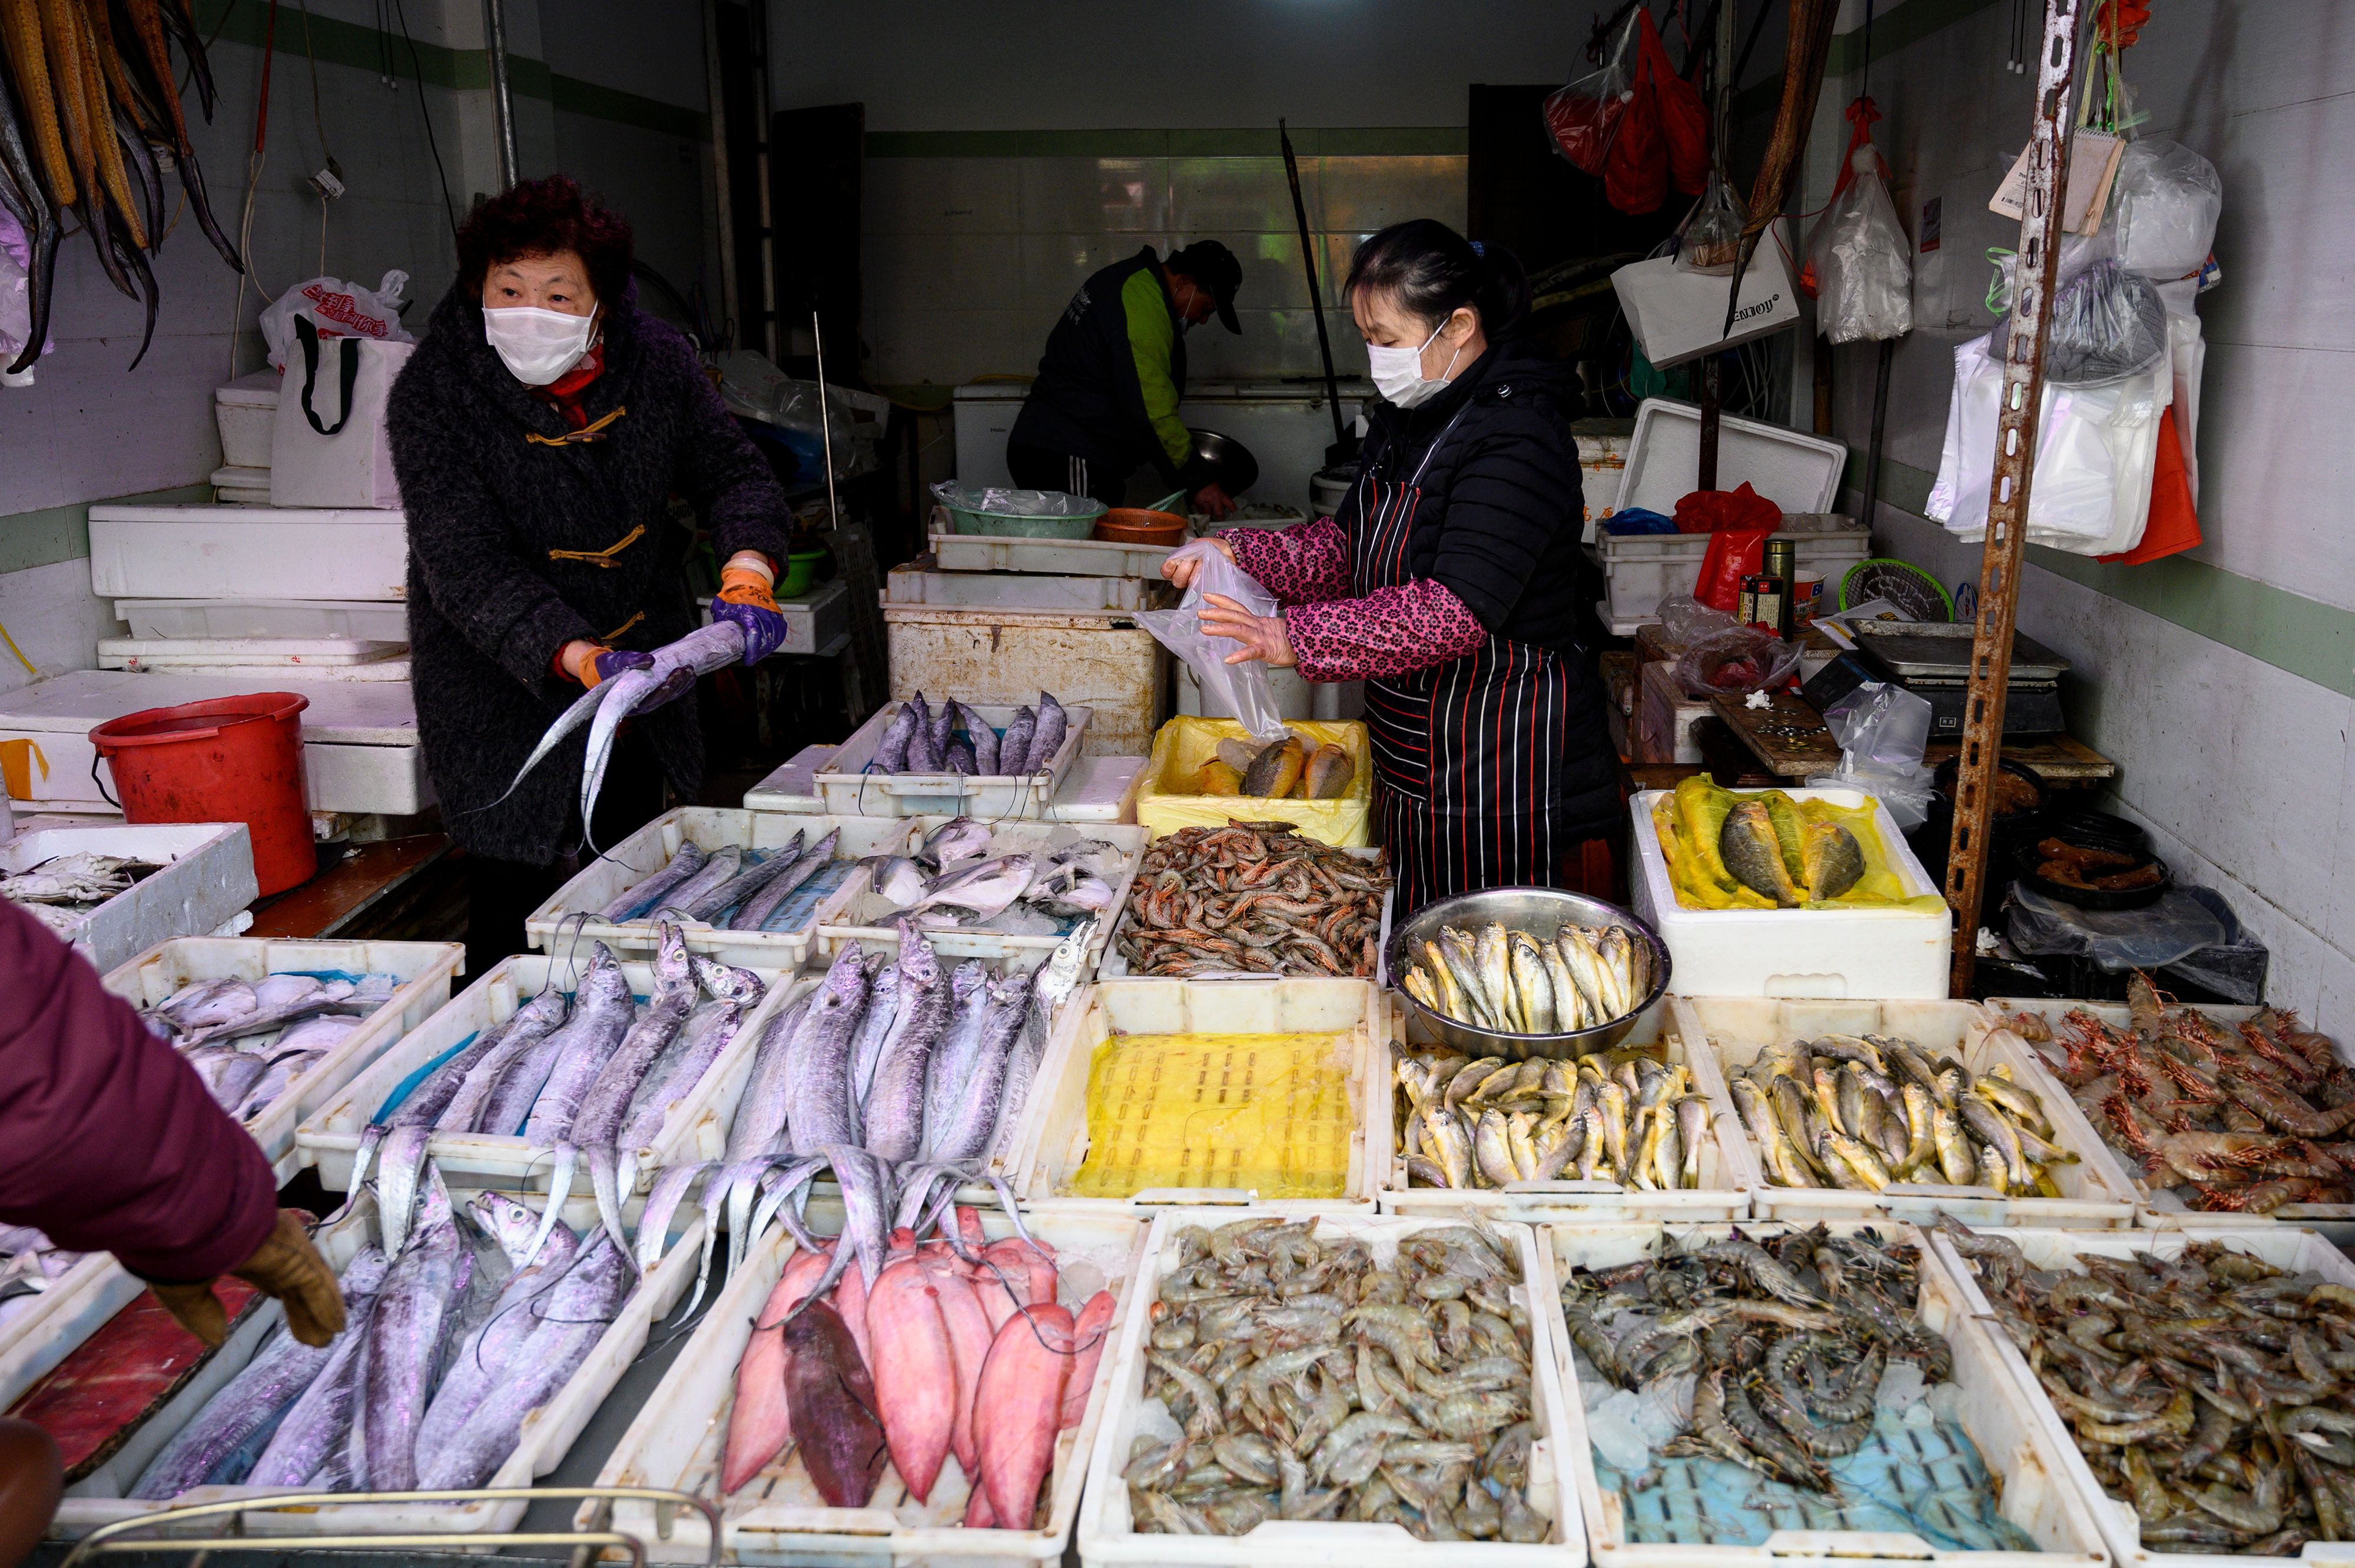 A seafood vendor (R) wearing a face mask talks to a customer at a wet market in Shanghai on February 13, 2020. (Photo by NOEL CELIS/AFP via Getty Images)